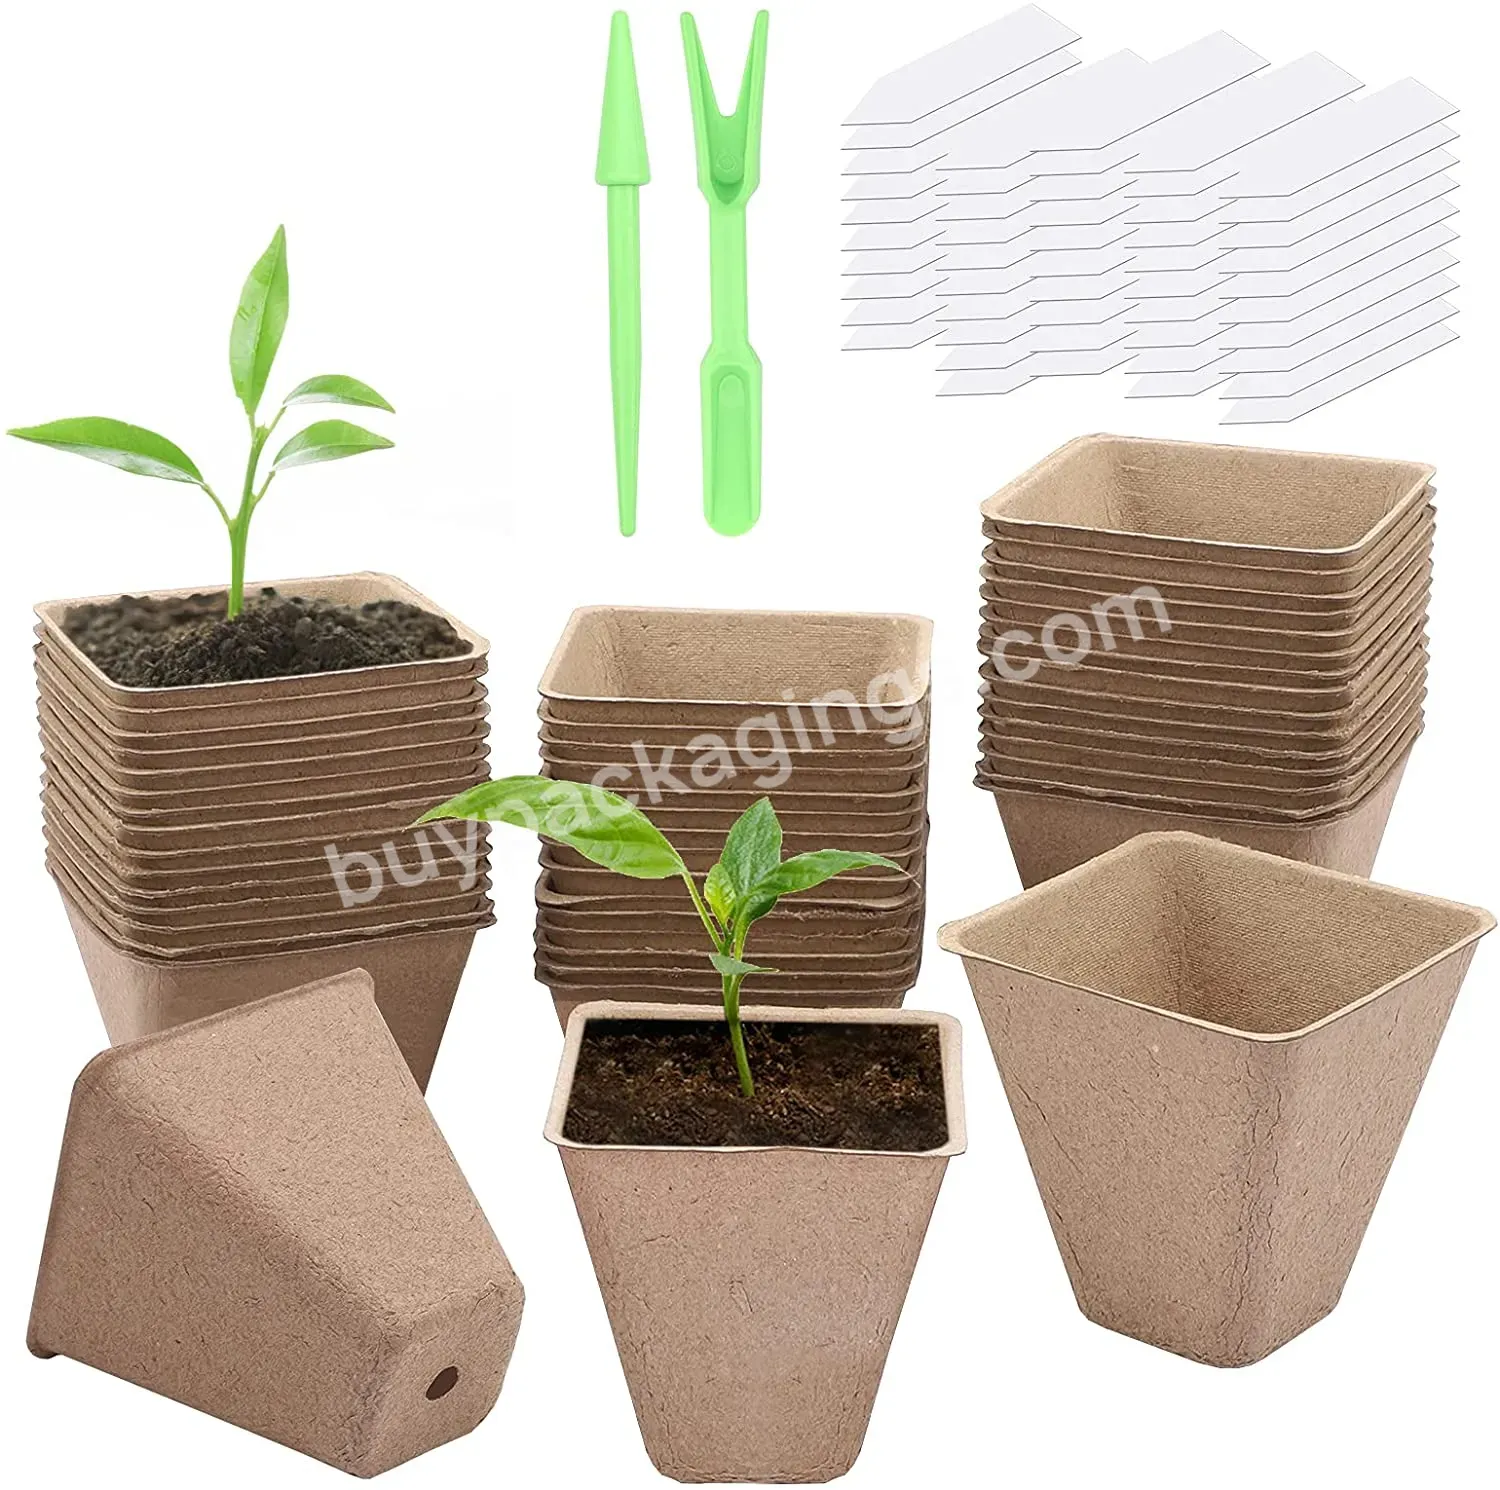 Seed Starter Peat Pots Kit Seed Starter Pots Square Seedling Tray With Holes For Garden Organic Biodegradable Seed Starter Tray